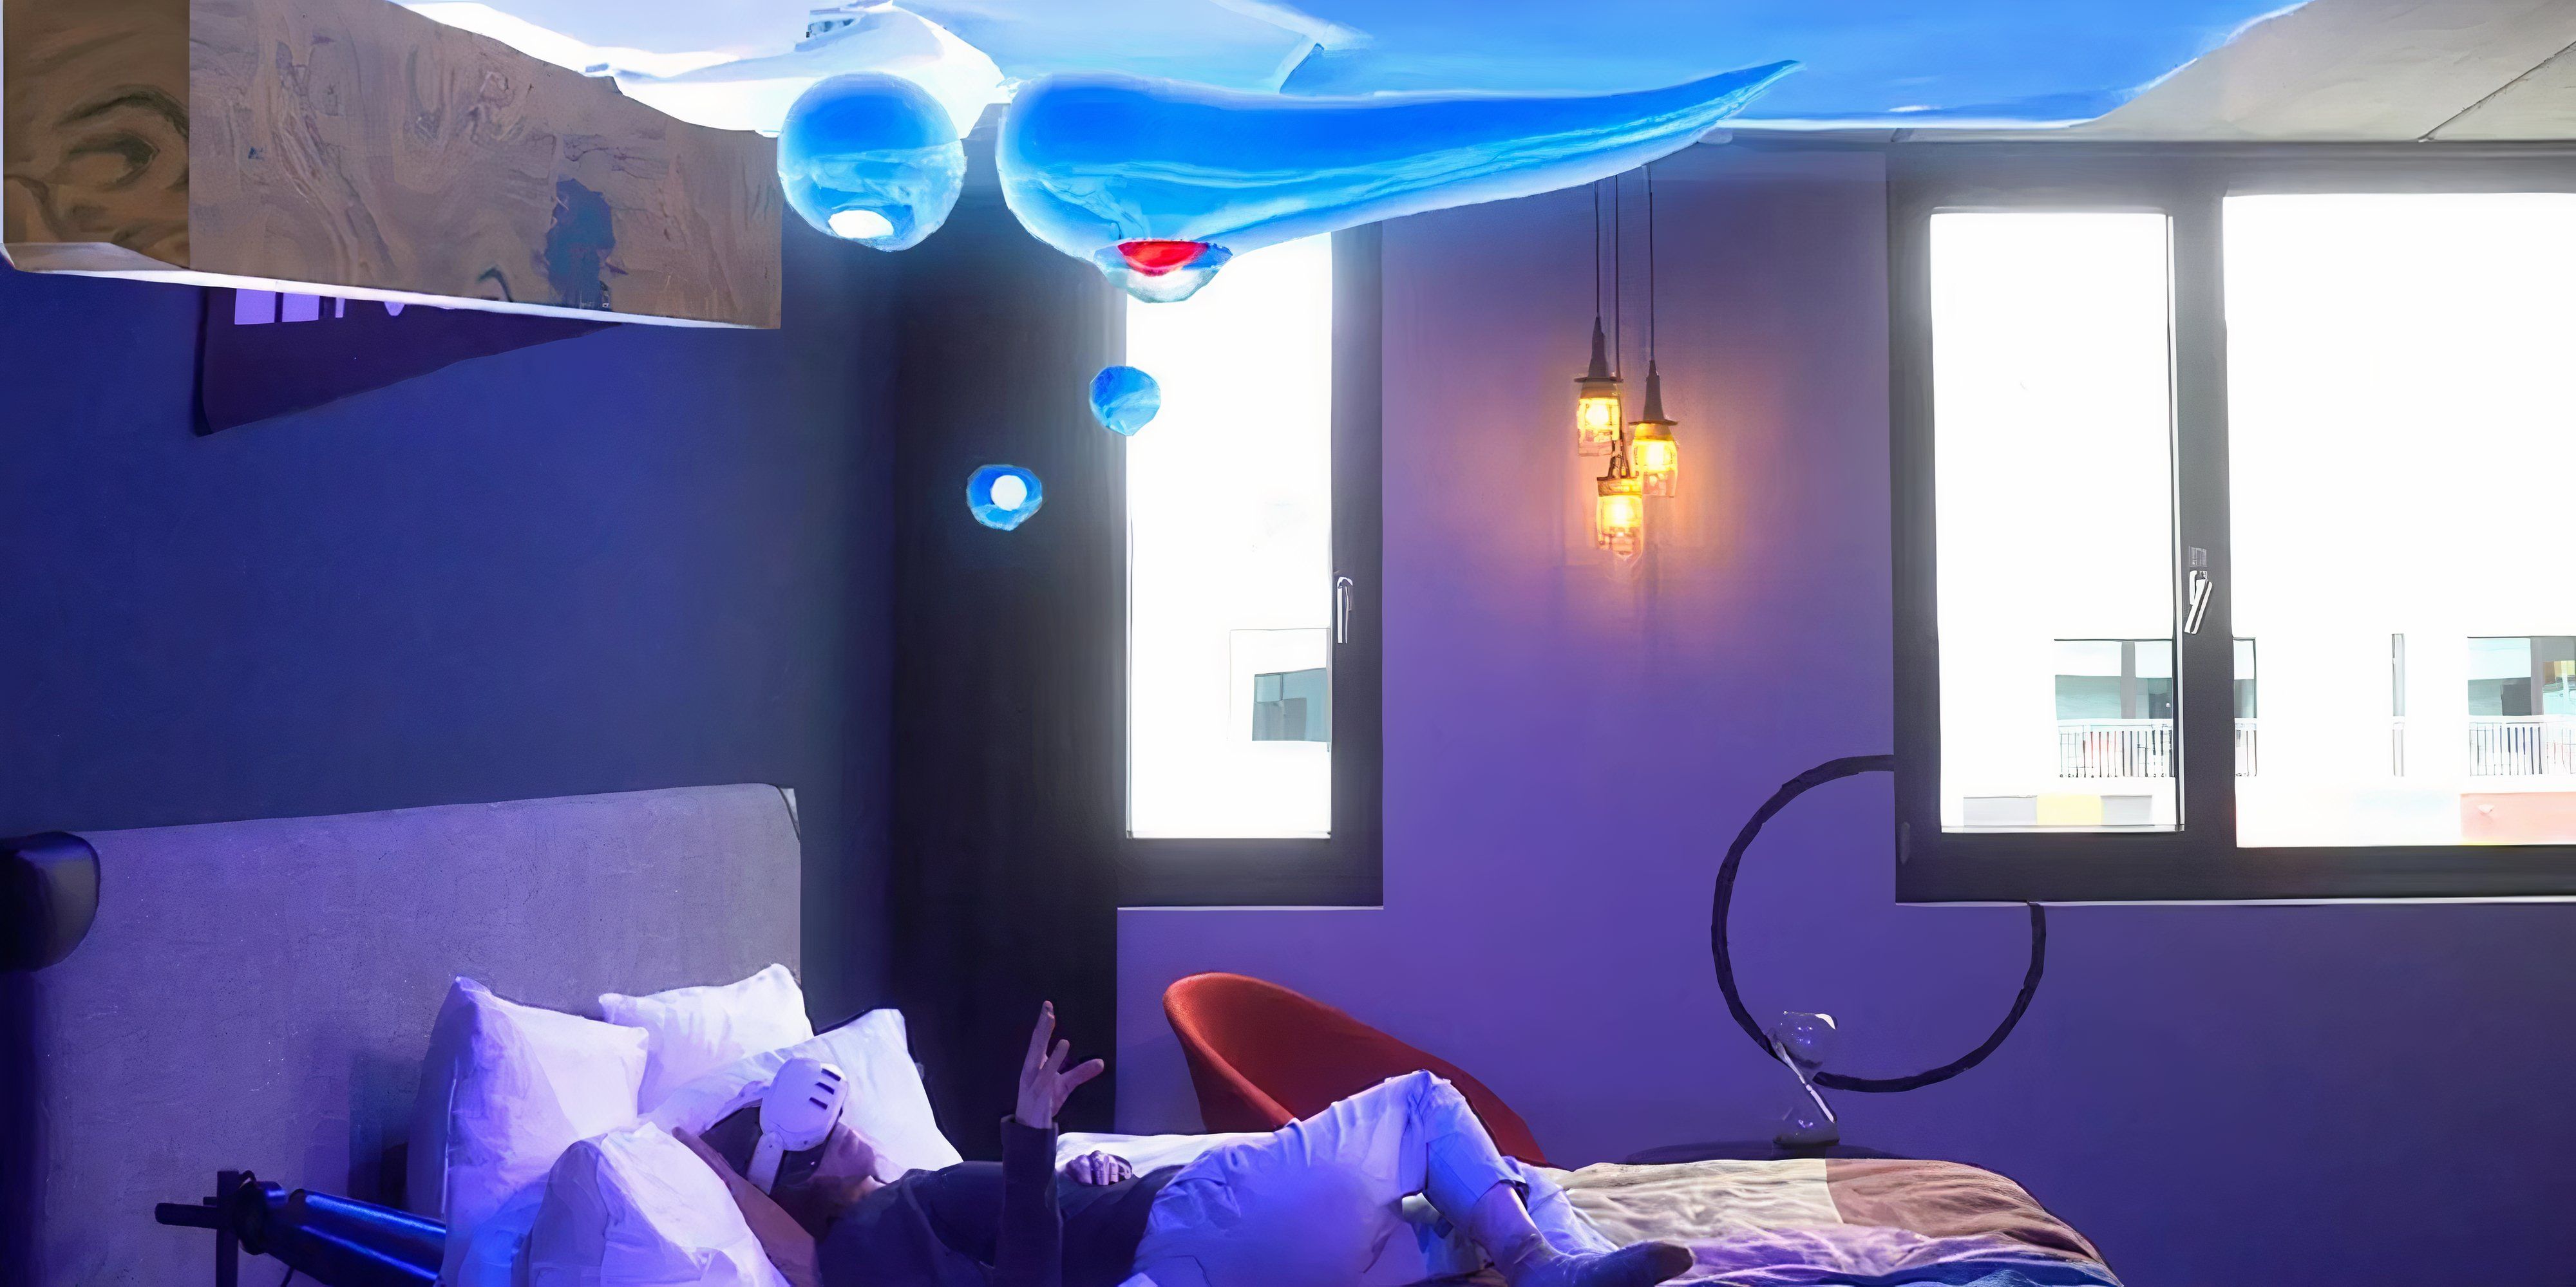 Key art for Pillow showing a virtual reality figuring asleep and dreaming